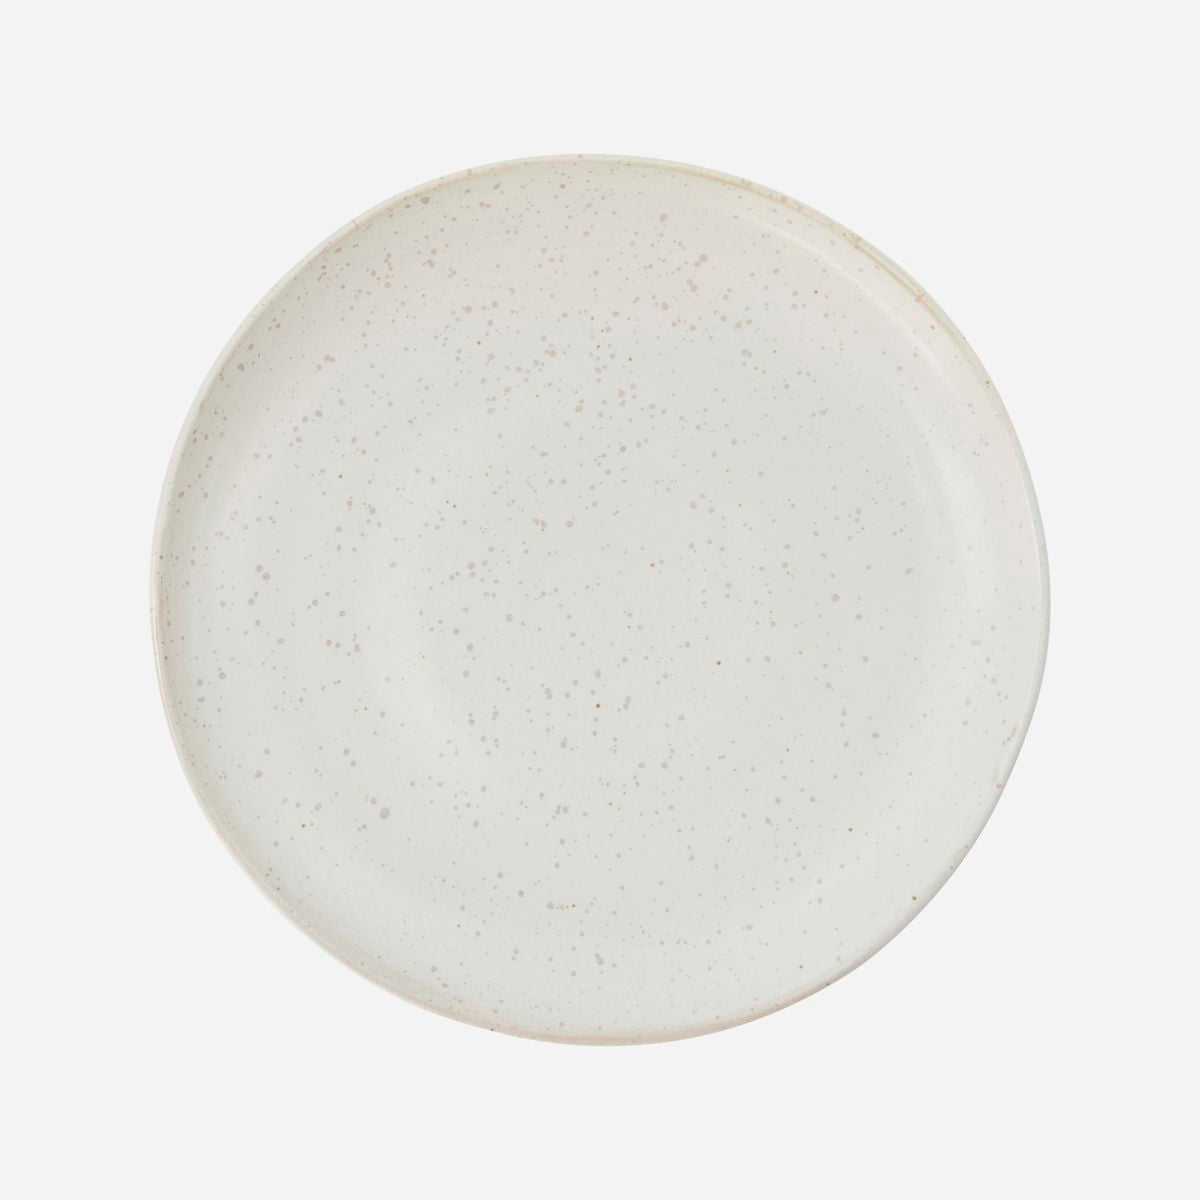 LUNCH PLATE PION - GREY/WHITE